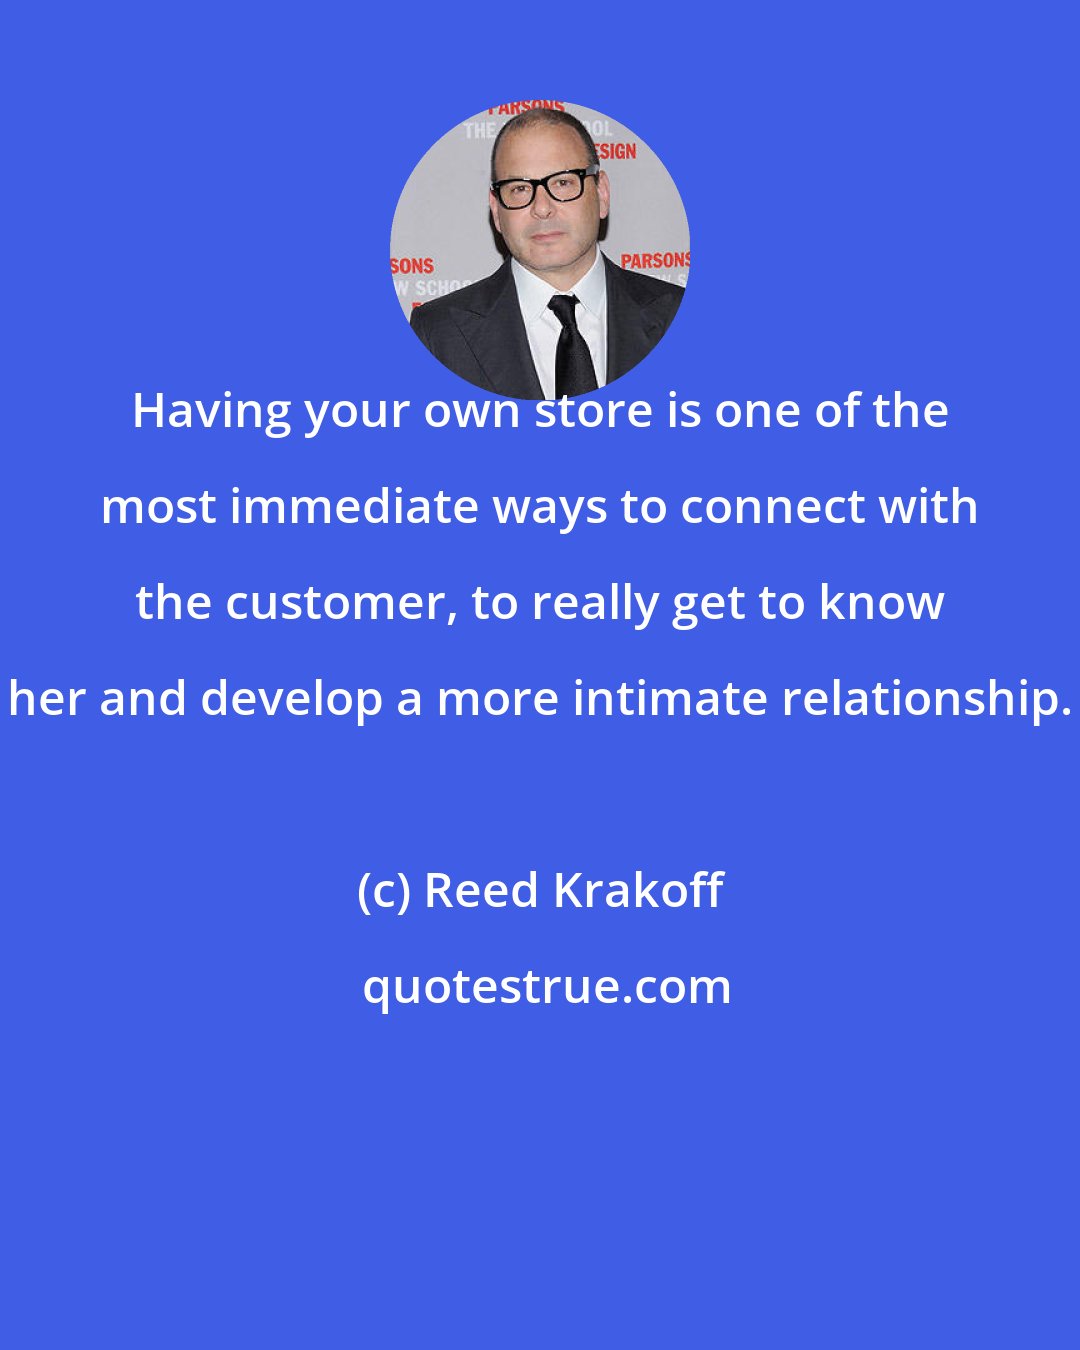 Reed Krakoff: Having your own store is one of the most immediate ways to connect with the customer, to really get to know her and develop a more intimate relationship.